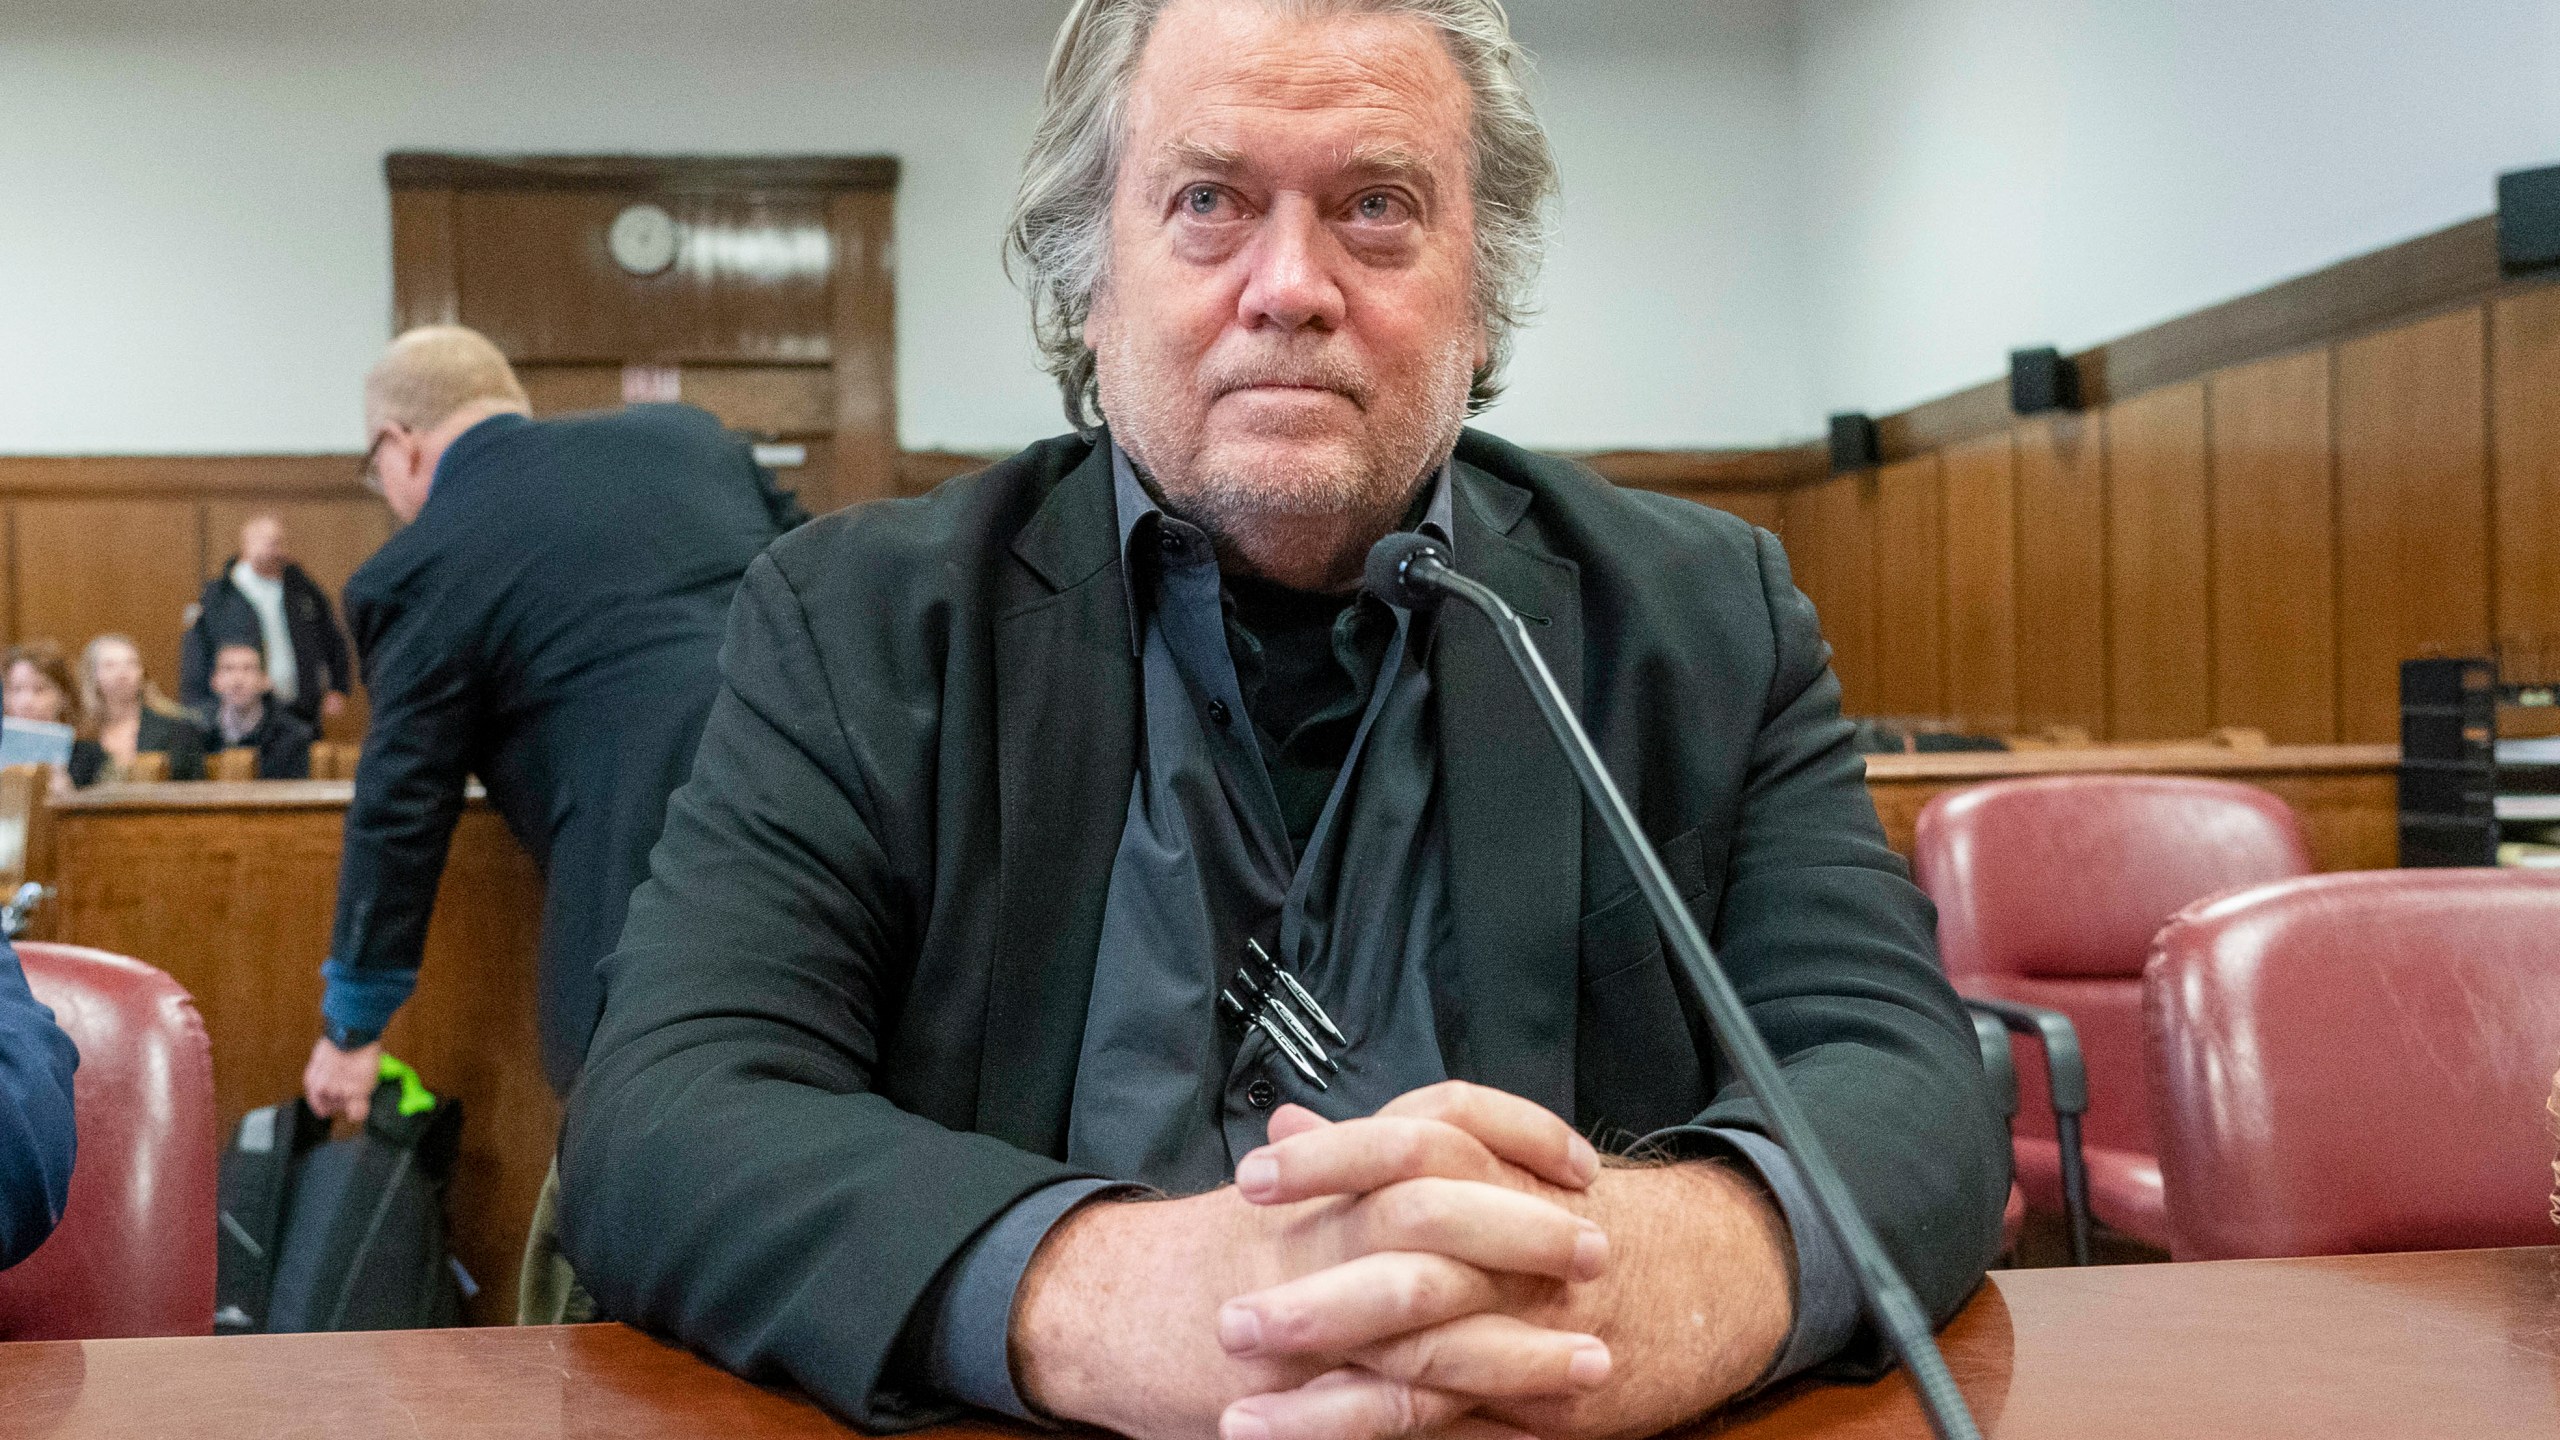 FILE - Steve Bannon appears in court in New York, Jan. 12, 2023. Trump ally Steve Bannon has asked the Supreme Court to delay his prison sentence while he fights his convictions for defying a subpoena from the House committee that investigated the attack on U.S. Capitol. The request from Republican former President Donald Trump's longtime ally comes after a federal appeals court panel rejected his bid to avoid reporting to prison by July 1 to serve his four-month sentence. (Steven Hirsch/New York Post via AP, Pool, File)